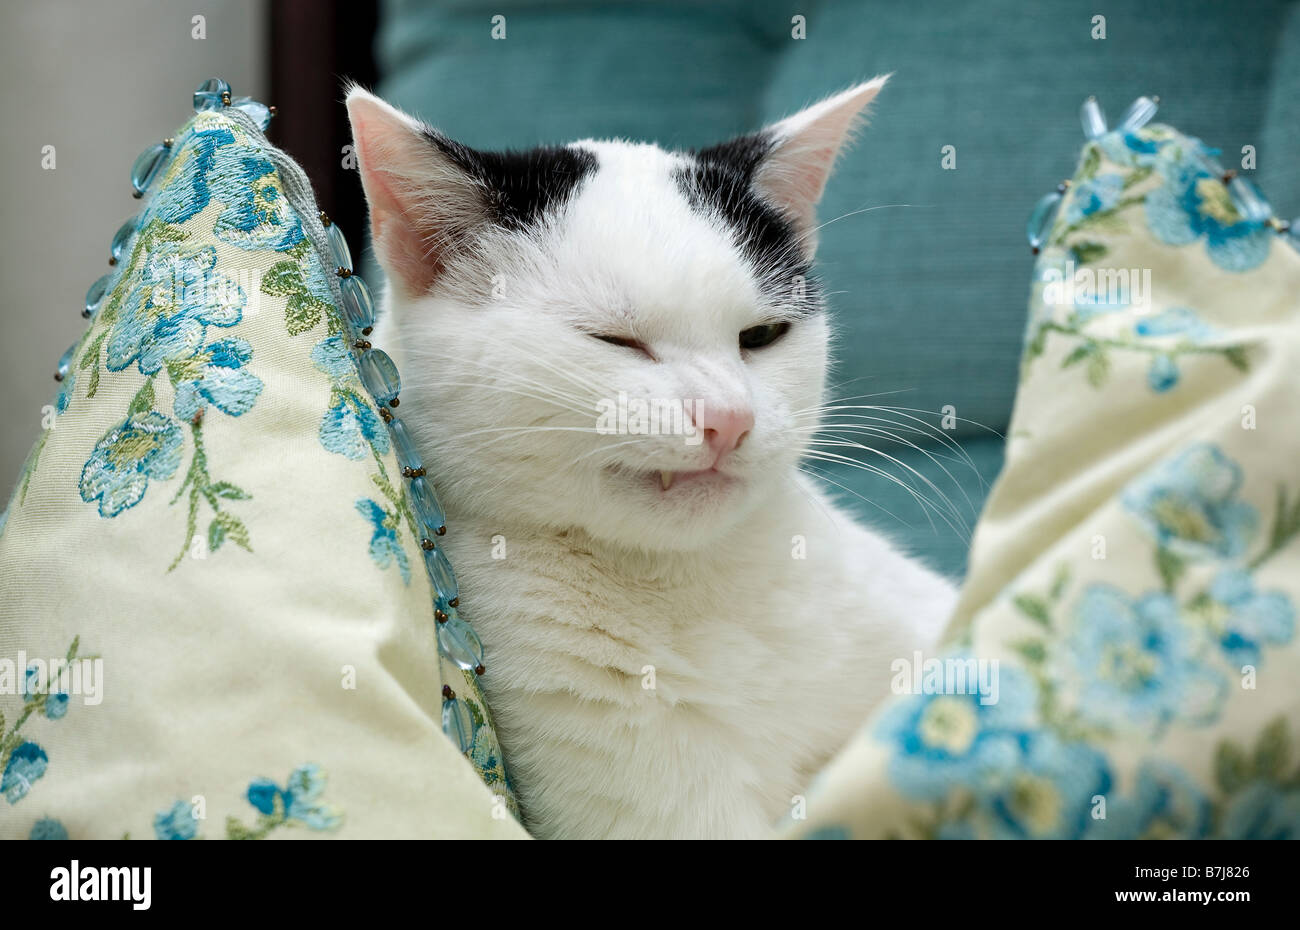 Young black and white domestic cat (Felis catus) sitting on cushion with funny screwed up facial expression Stock Photo